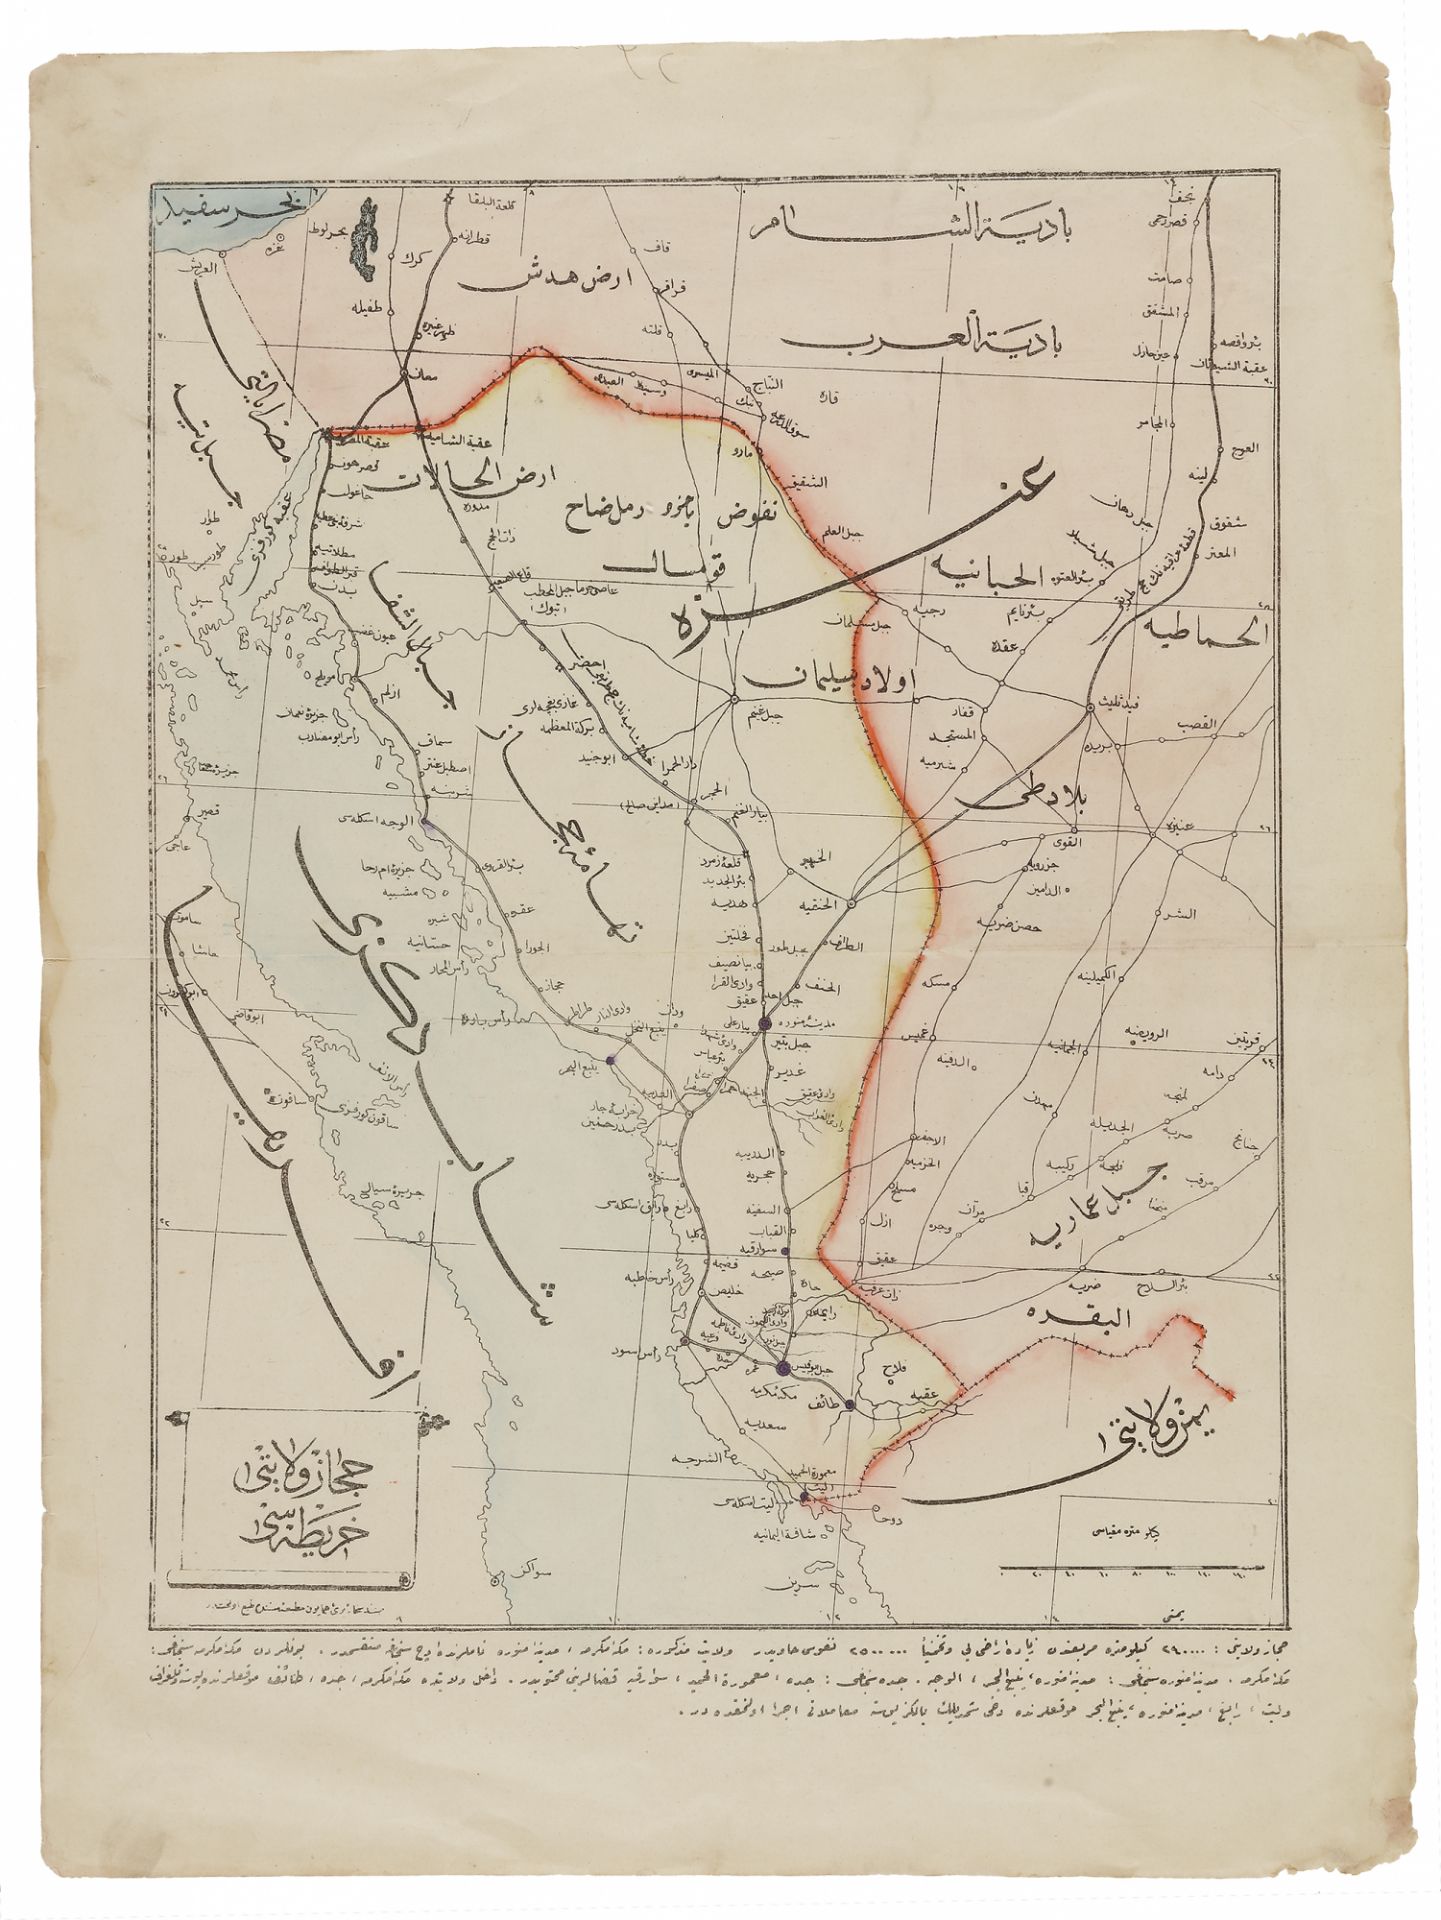 THREE RARE MAPS OF THE ARABIAN PENINSULA BY THE SURVEYOR ‘YEMENI’ BETWEEN 1850s TO 1860s, PRINTED BY - Image 2 of 4